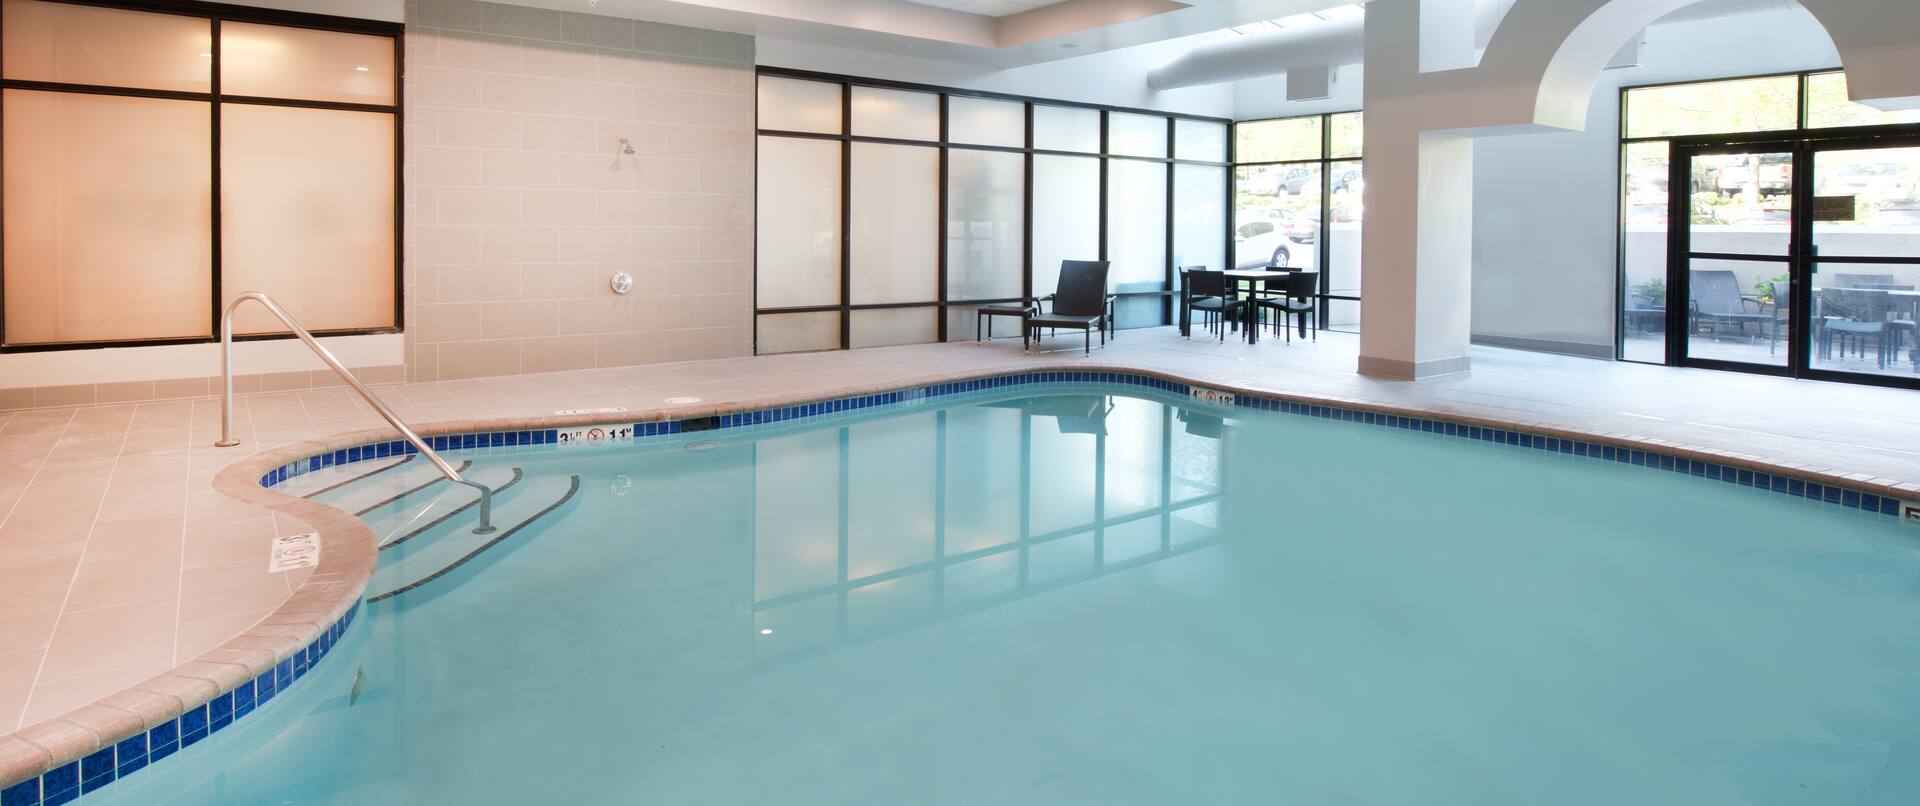 Indoor Swimming Pool Area with Table and Chairs